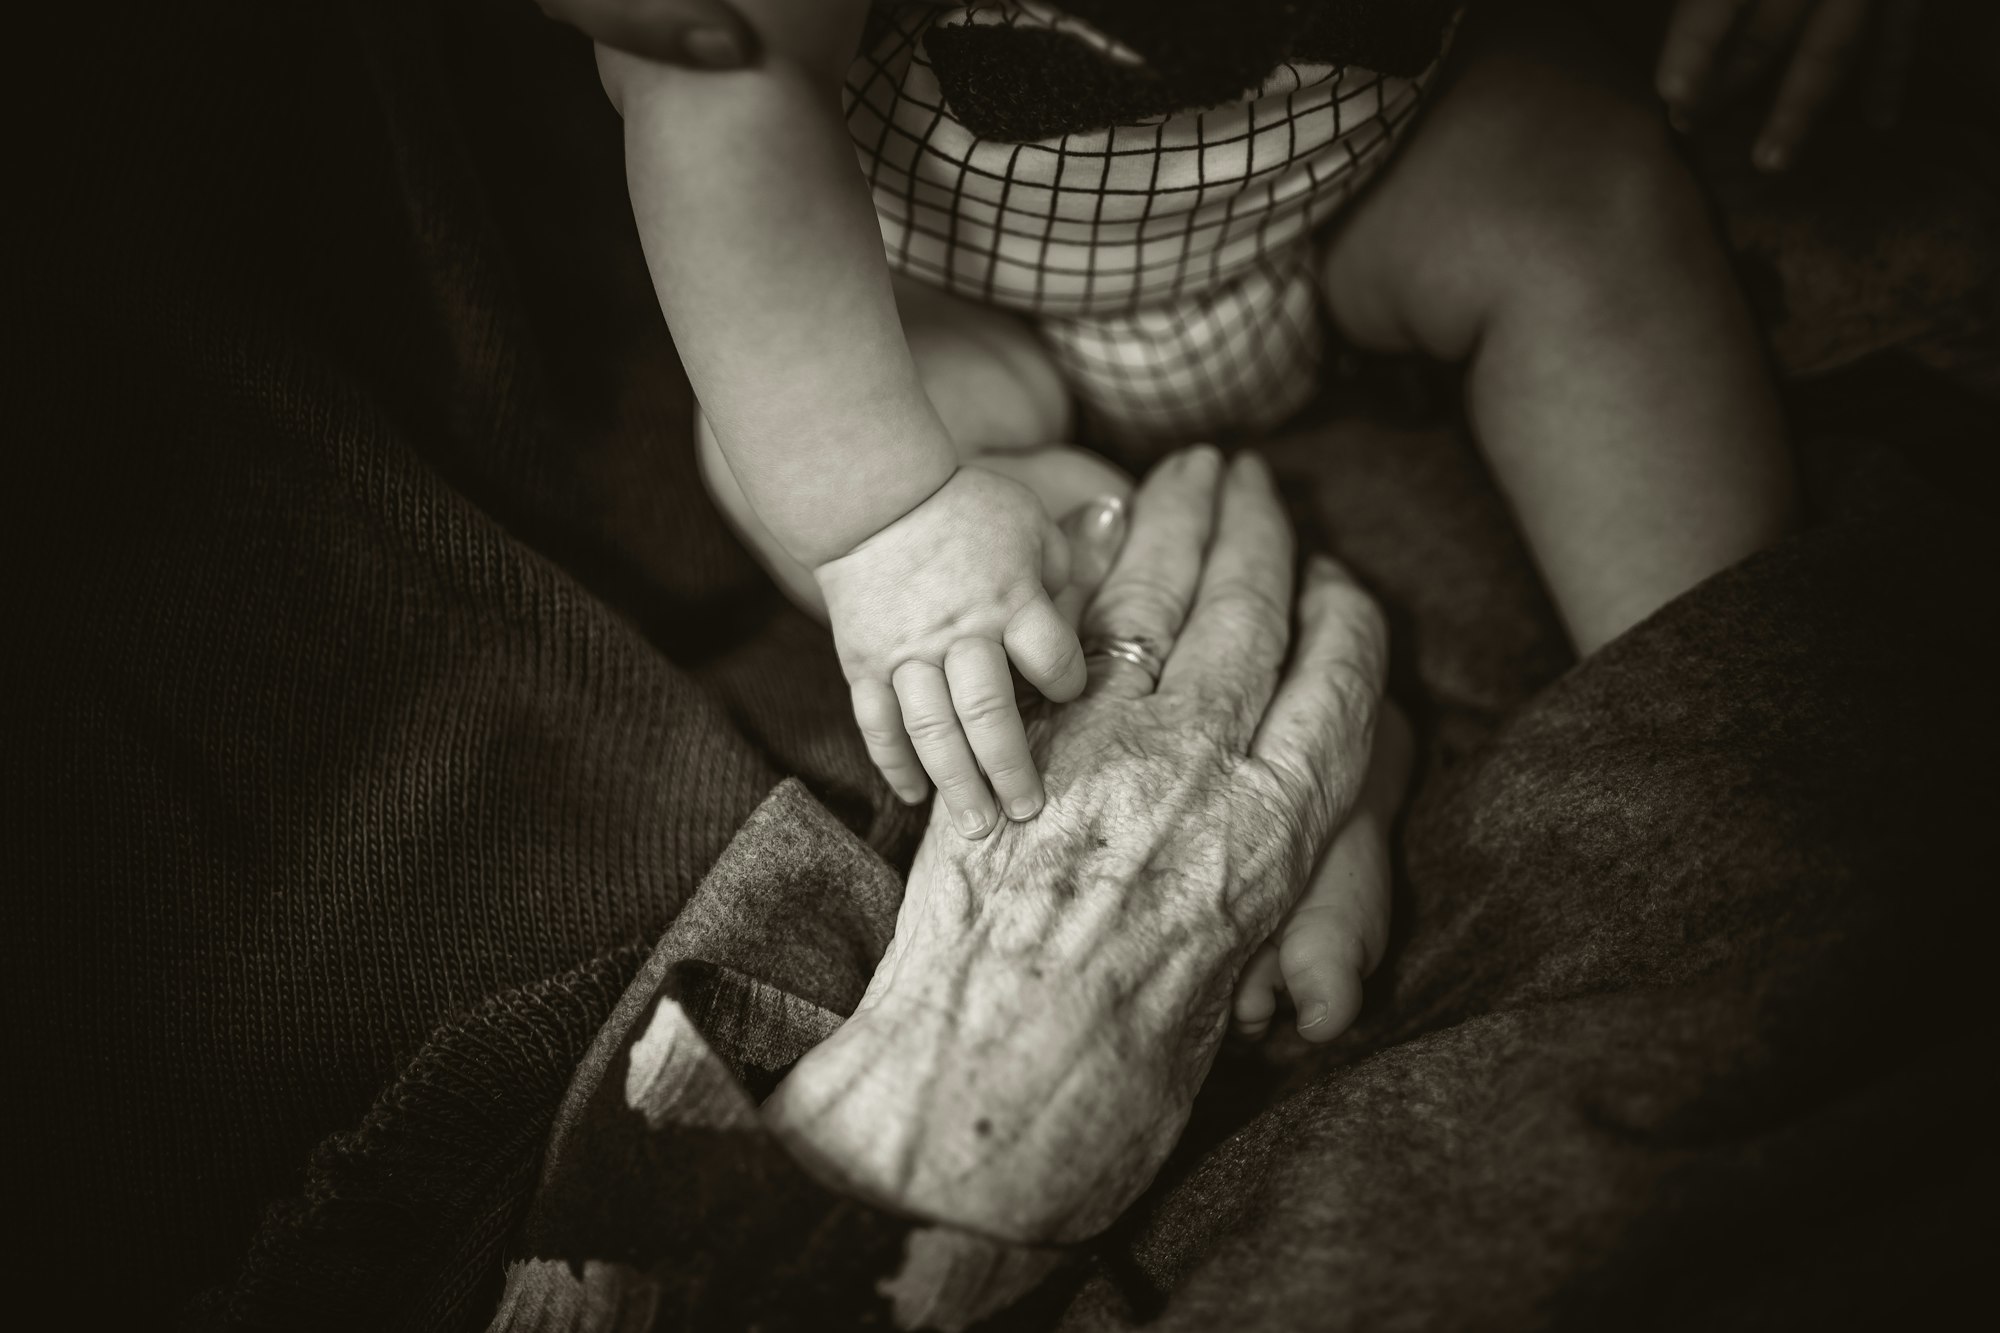 I love this photo of my mums hand reaching out to share a moment with her great grandson.  Even when we can’t understand each other in language, we can all understand what a simple touch means.